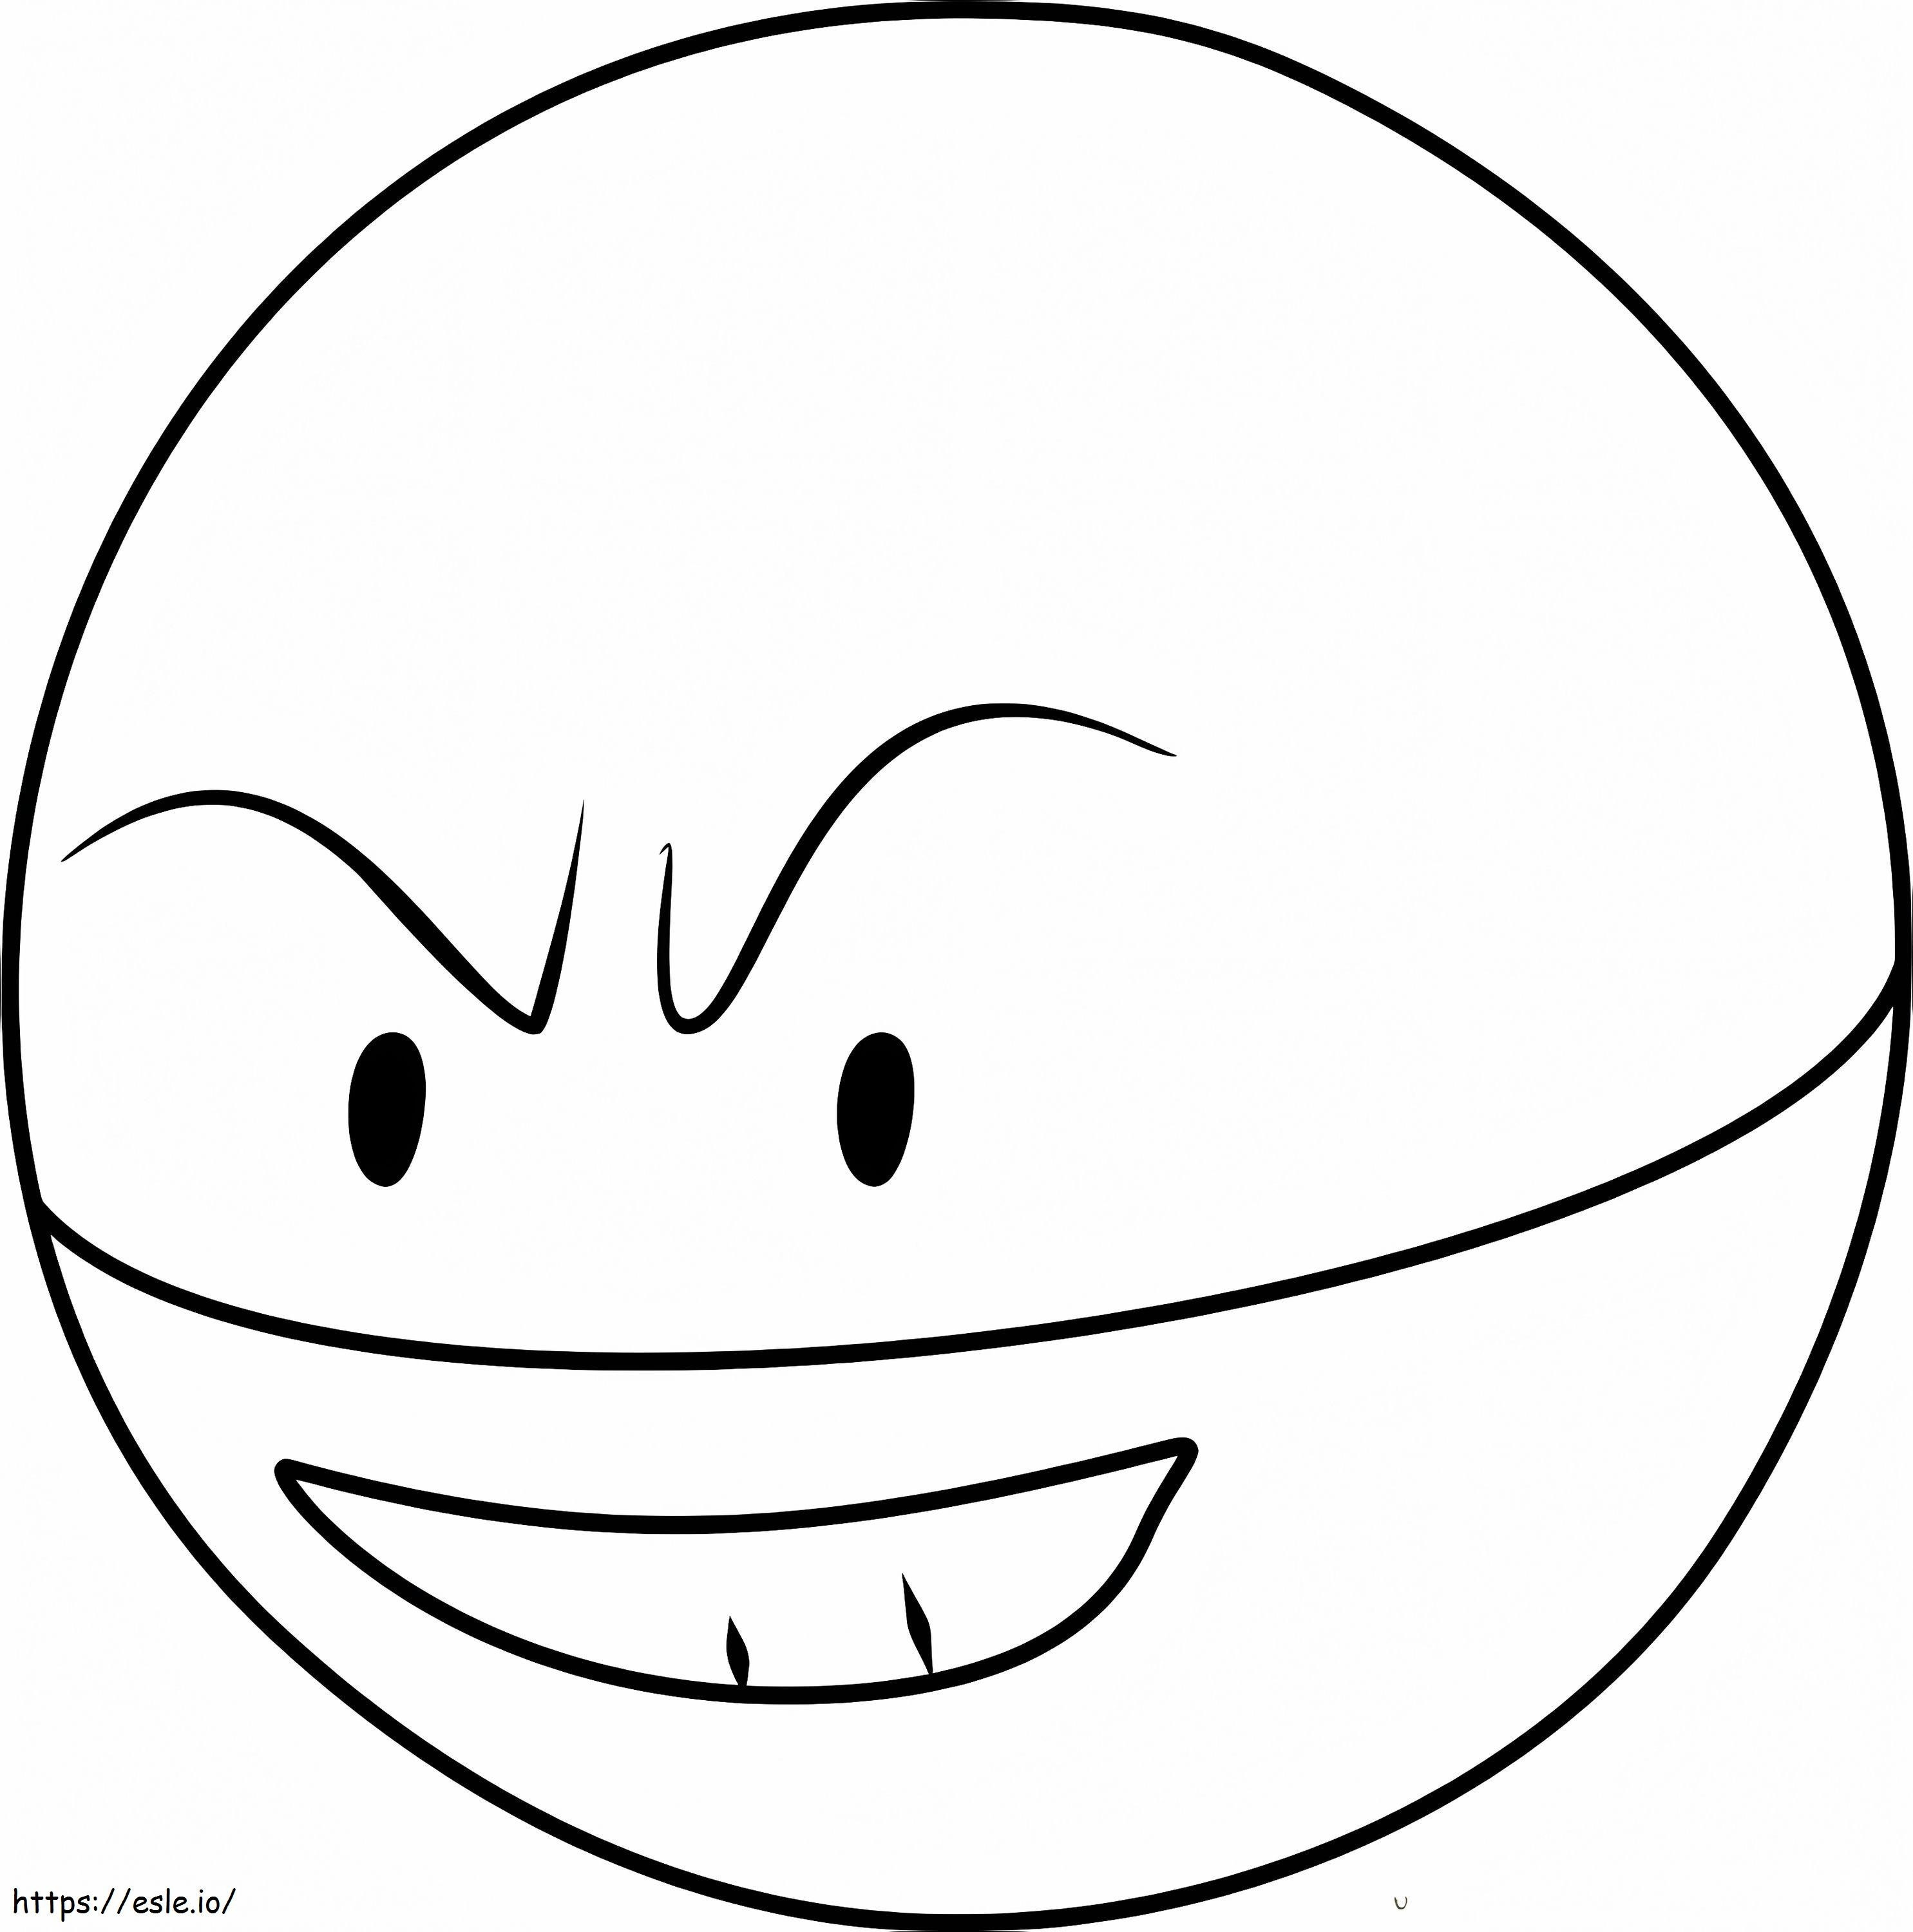 Free Electrode coloring page